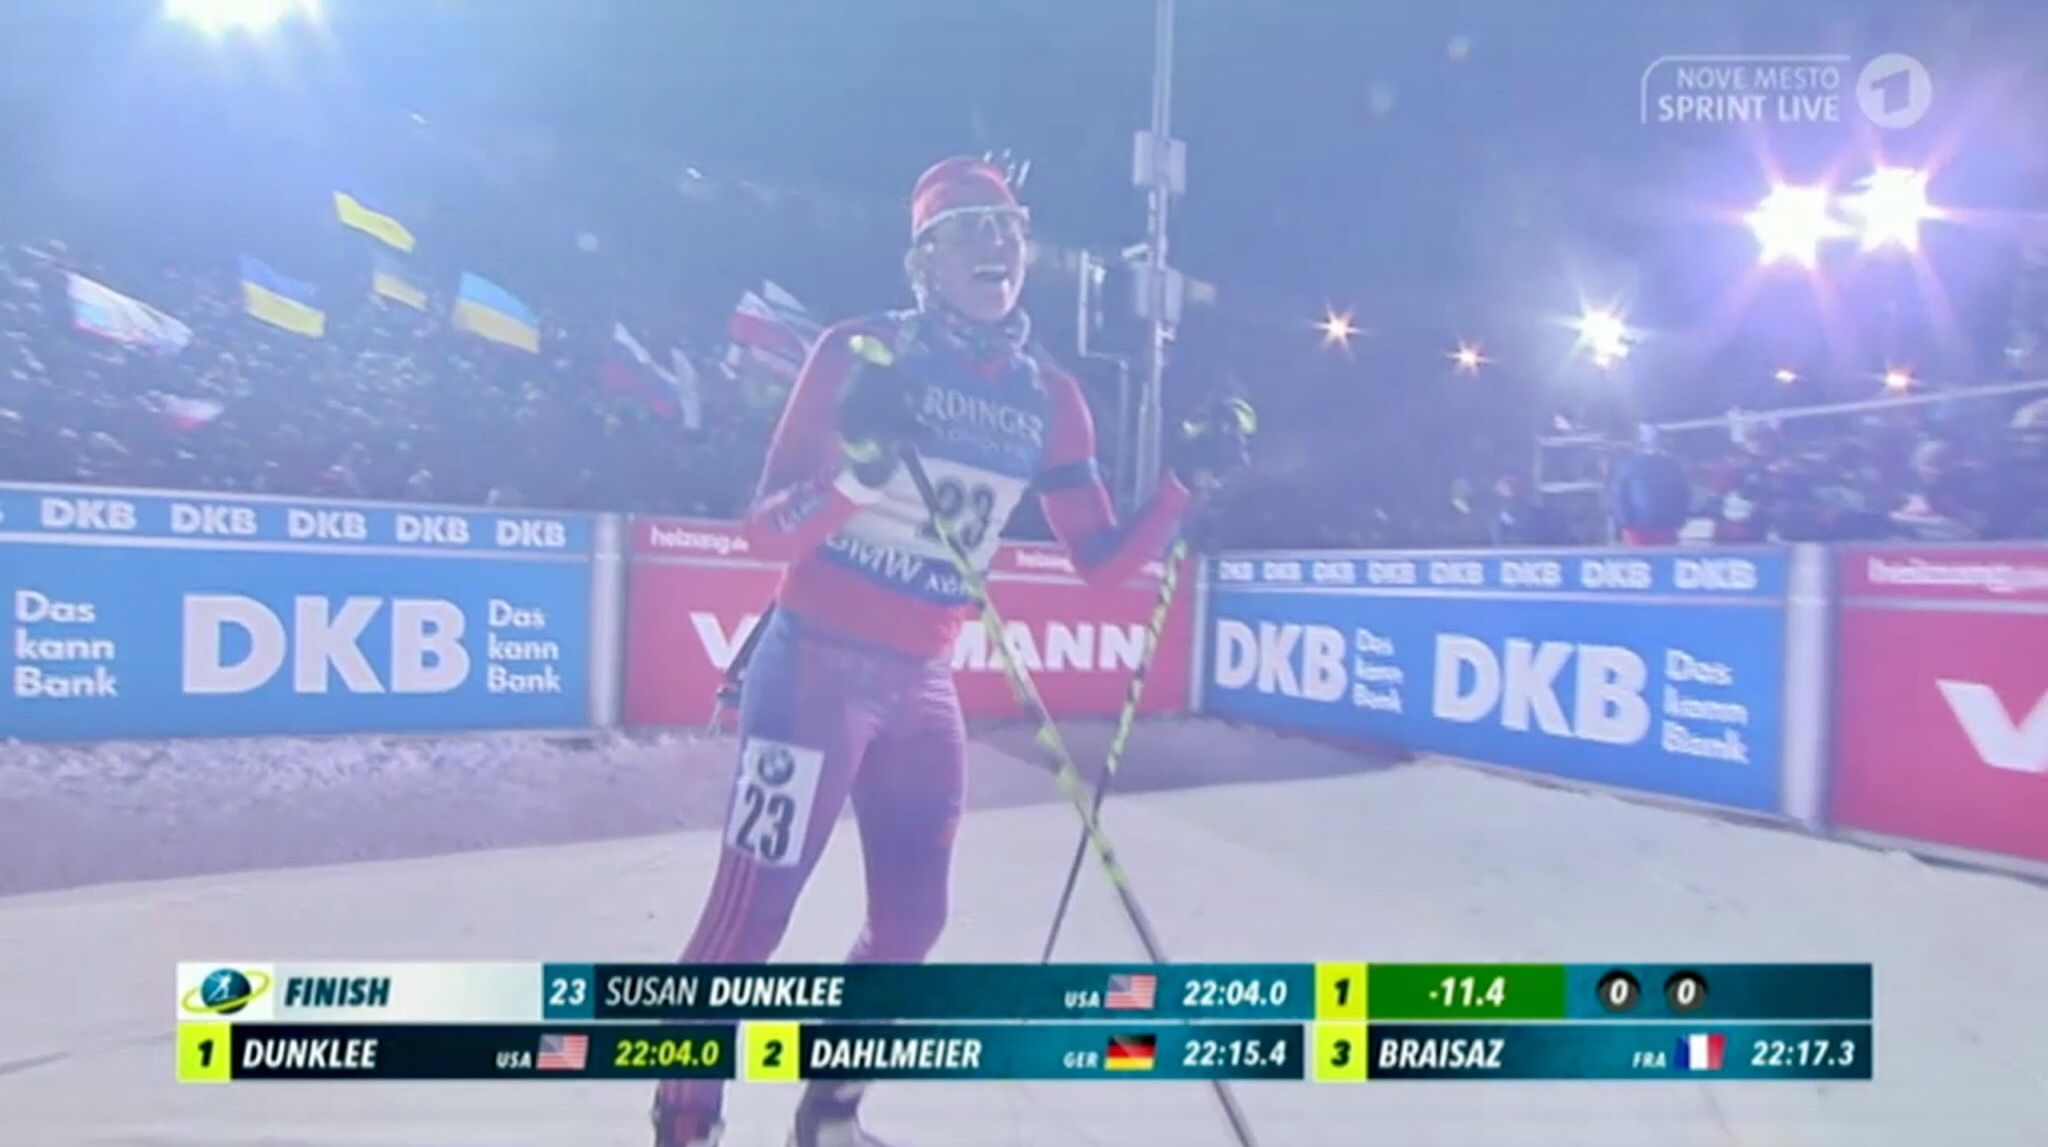 Susan Dunklee (US Biathlon) after crossing the finish first through 23 finishers in the women's 7.5 k sprint at the IBU World Cup in Nove Mesto, Czech Republic. She went on to place third for her first podium of the season and the fourth of her career. 